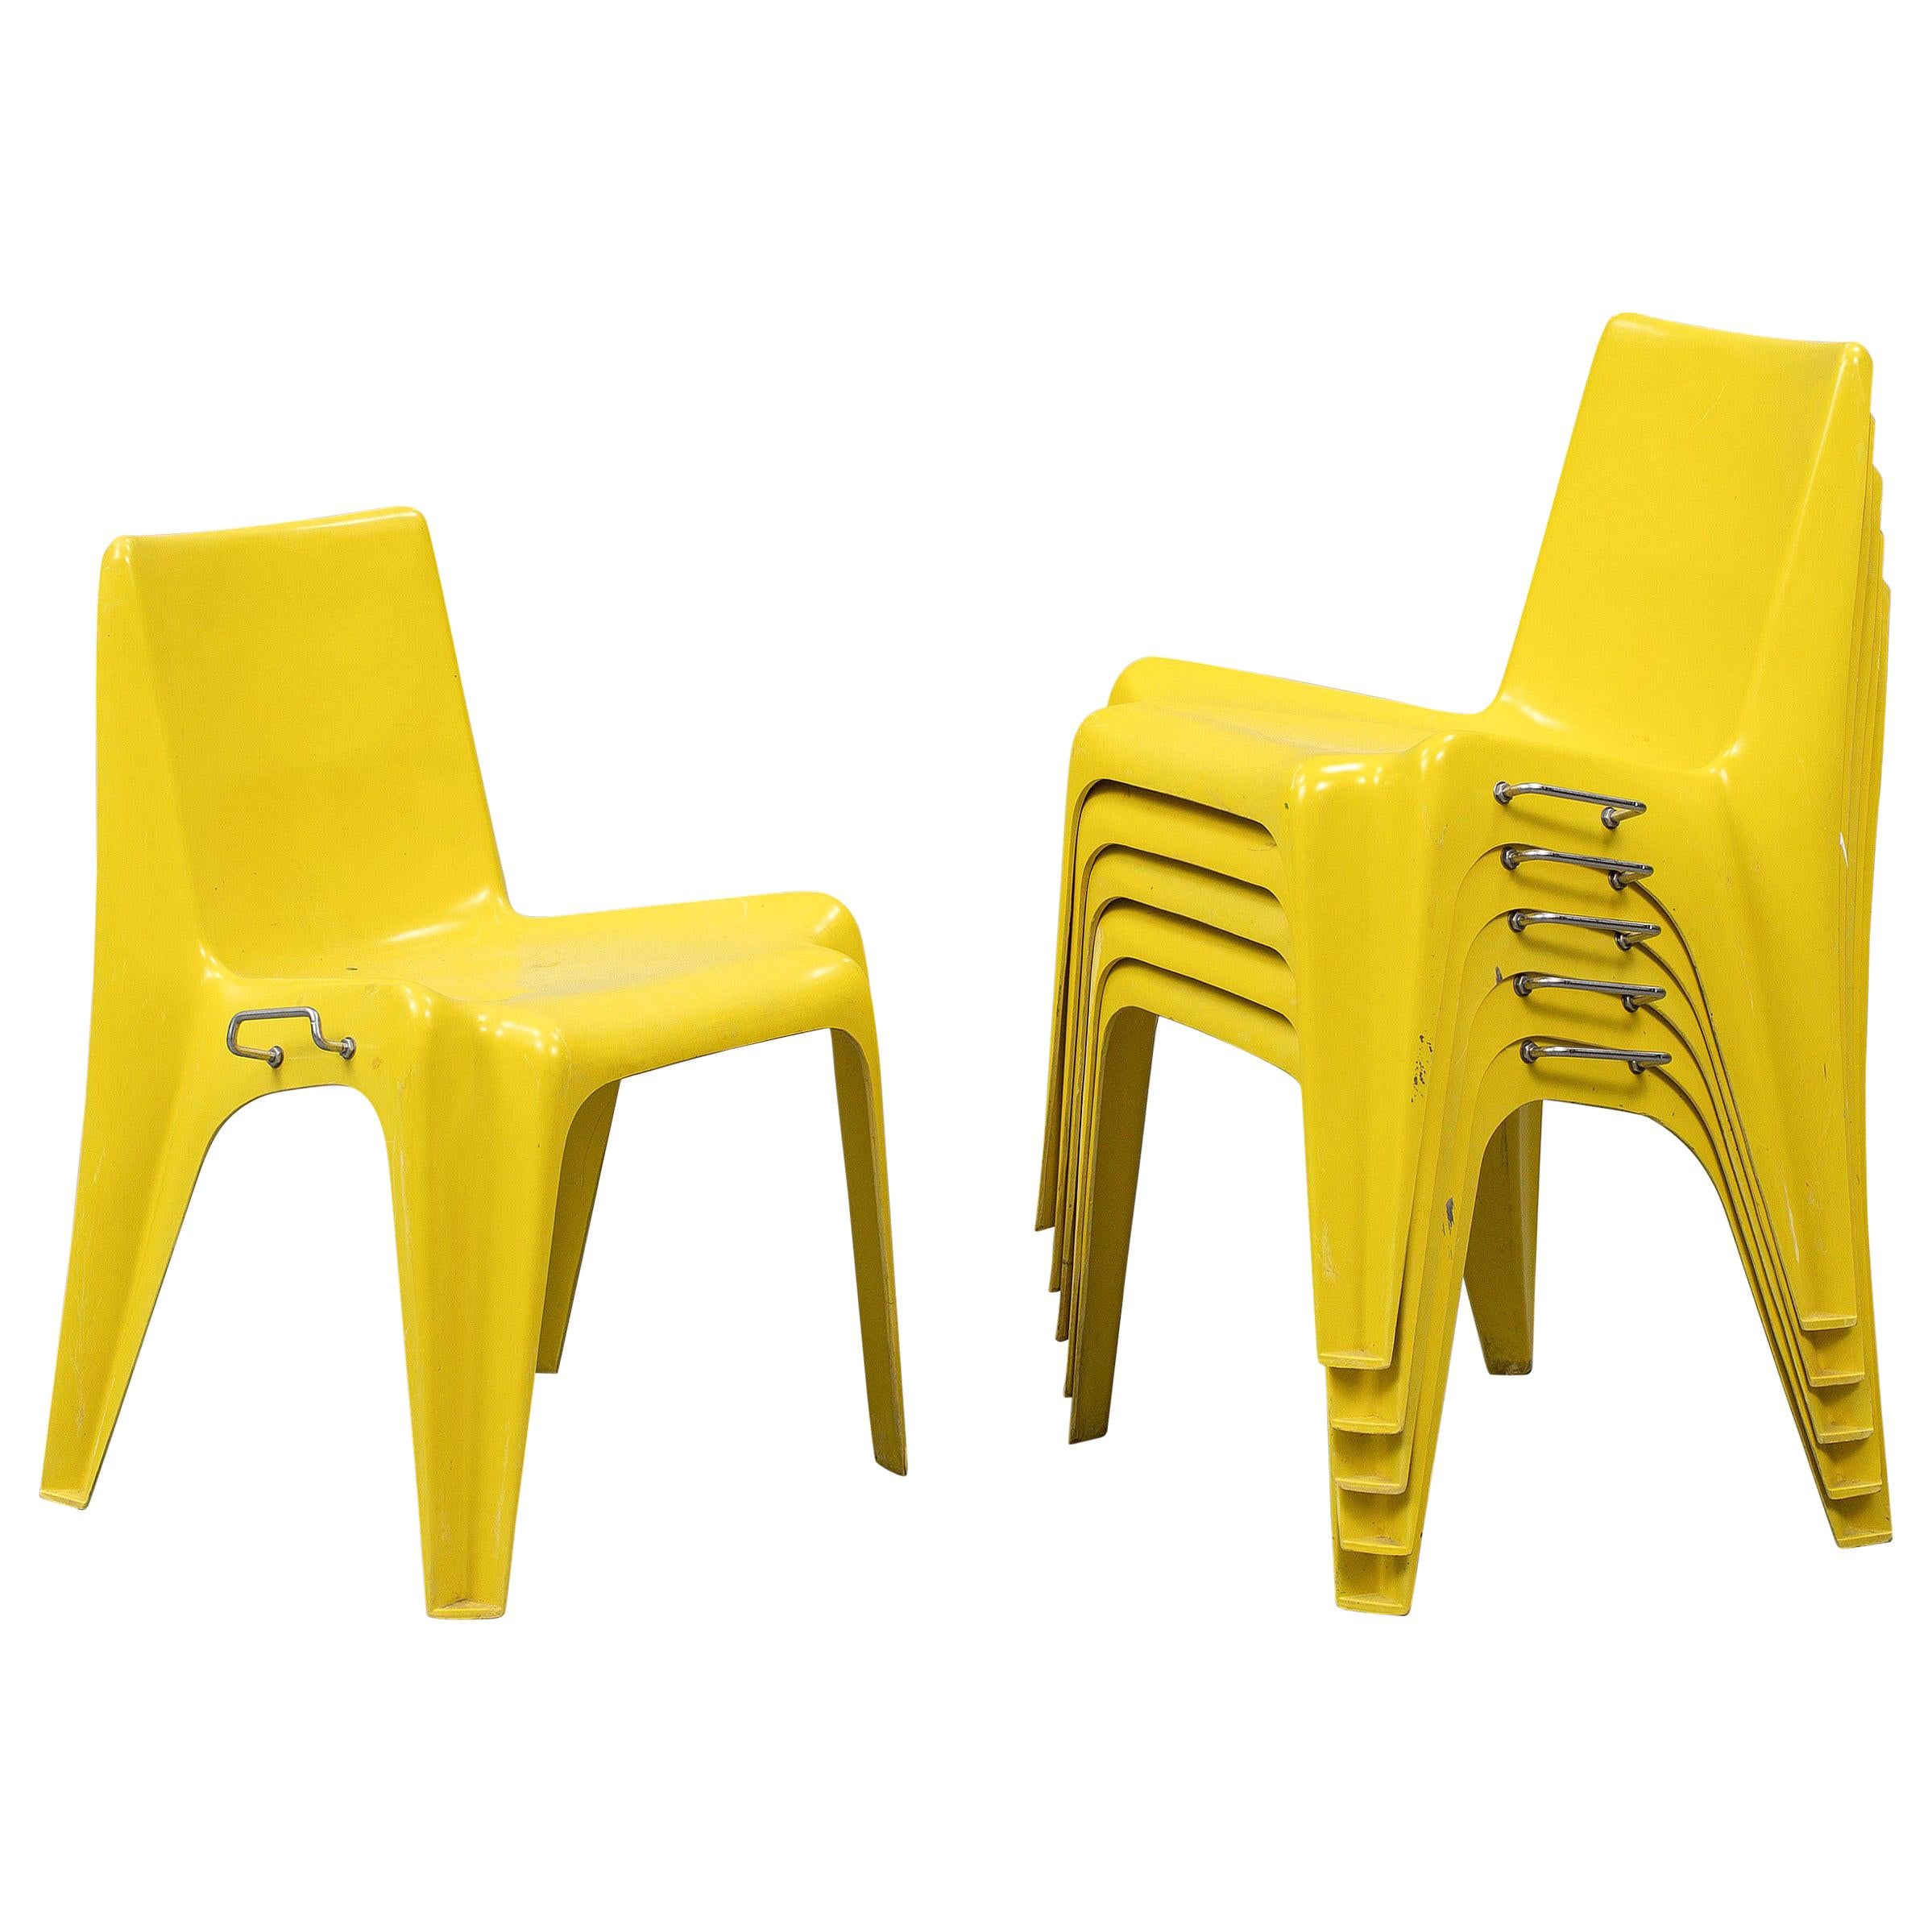 Stackable Bofinger Yellow Chairs by Helmut Batzner, First Edition, Set of 6 For Sale